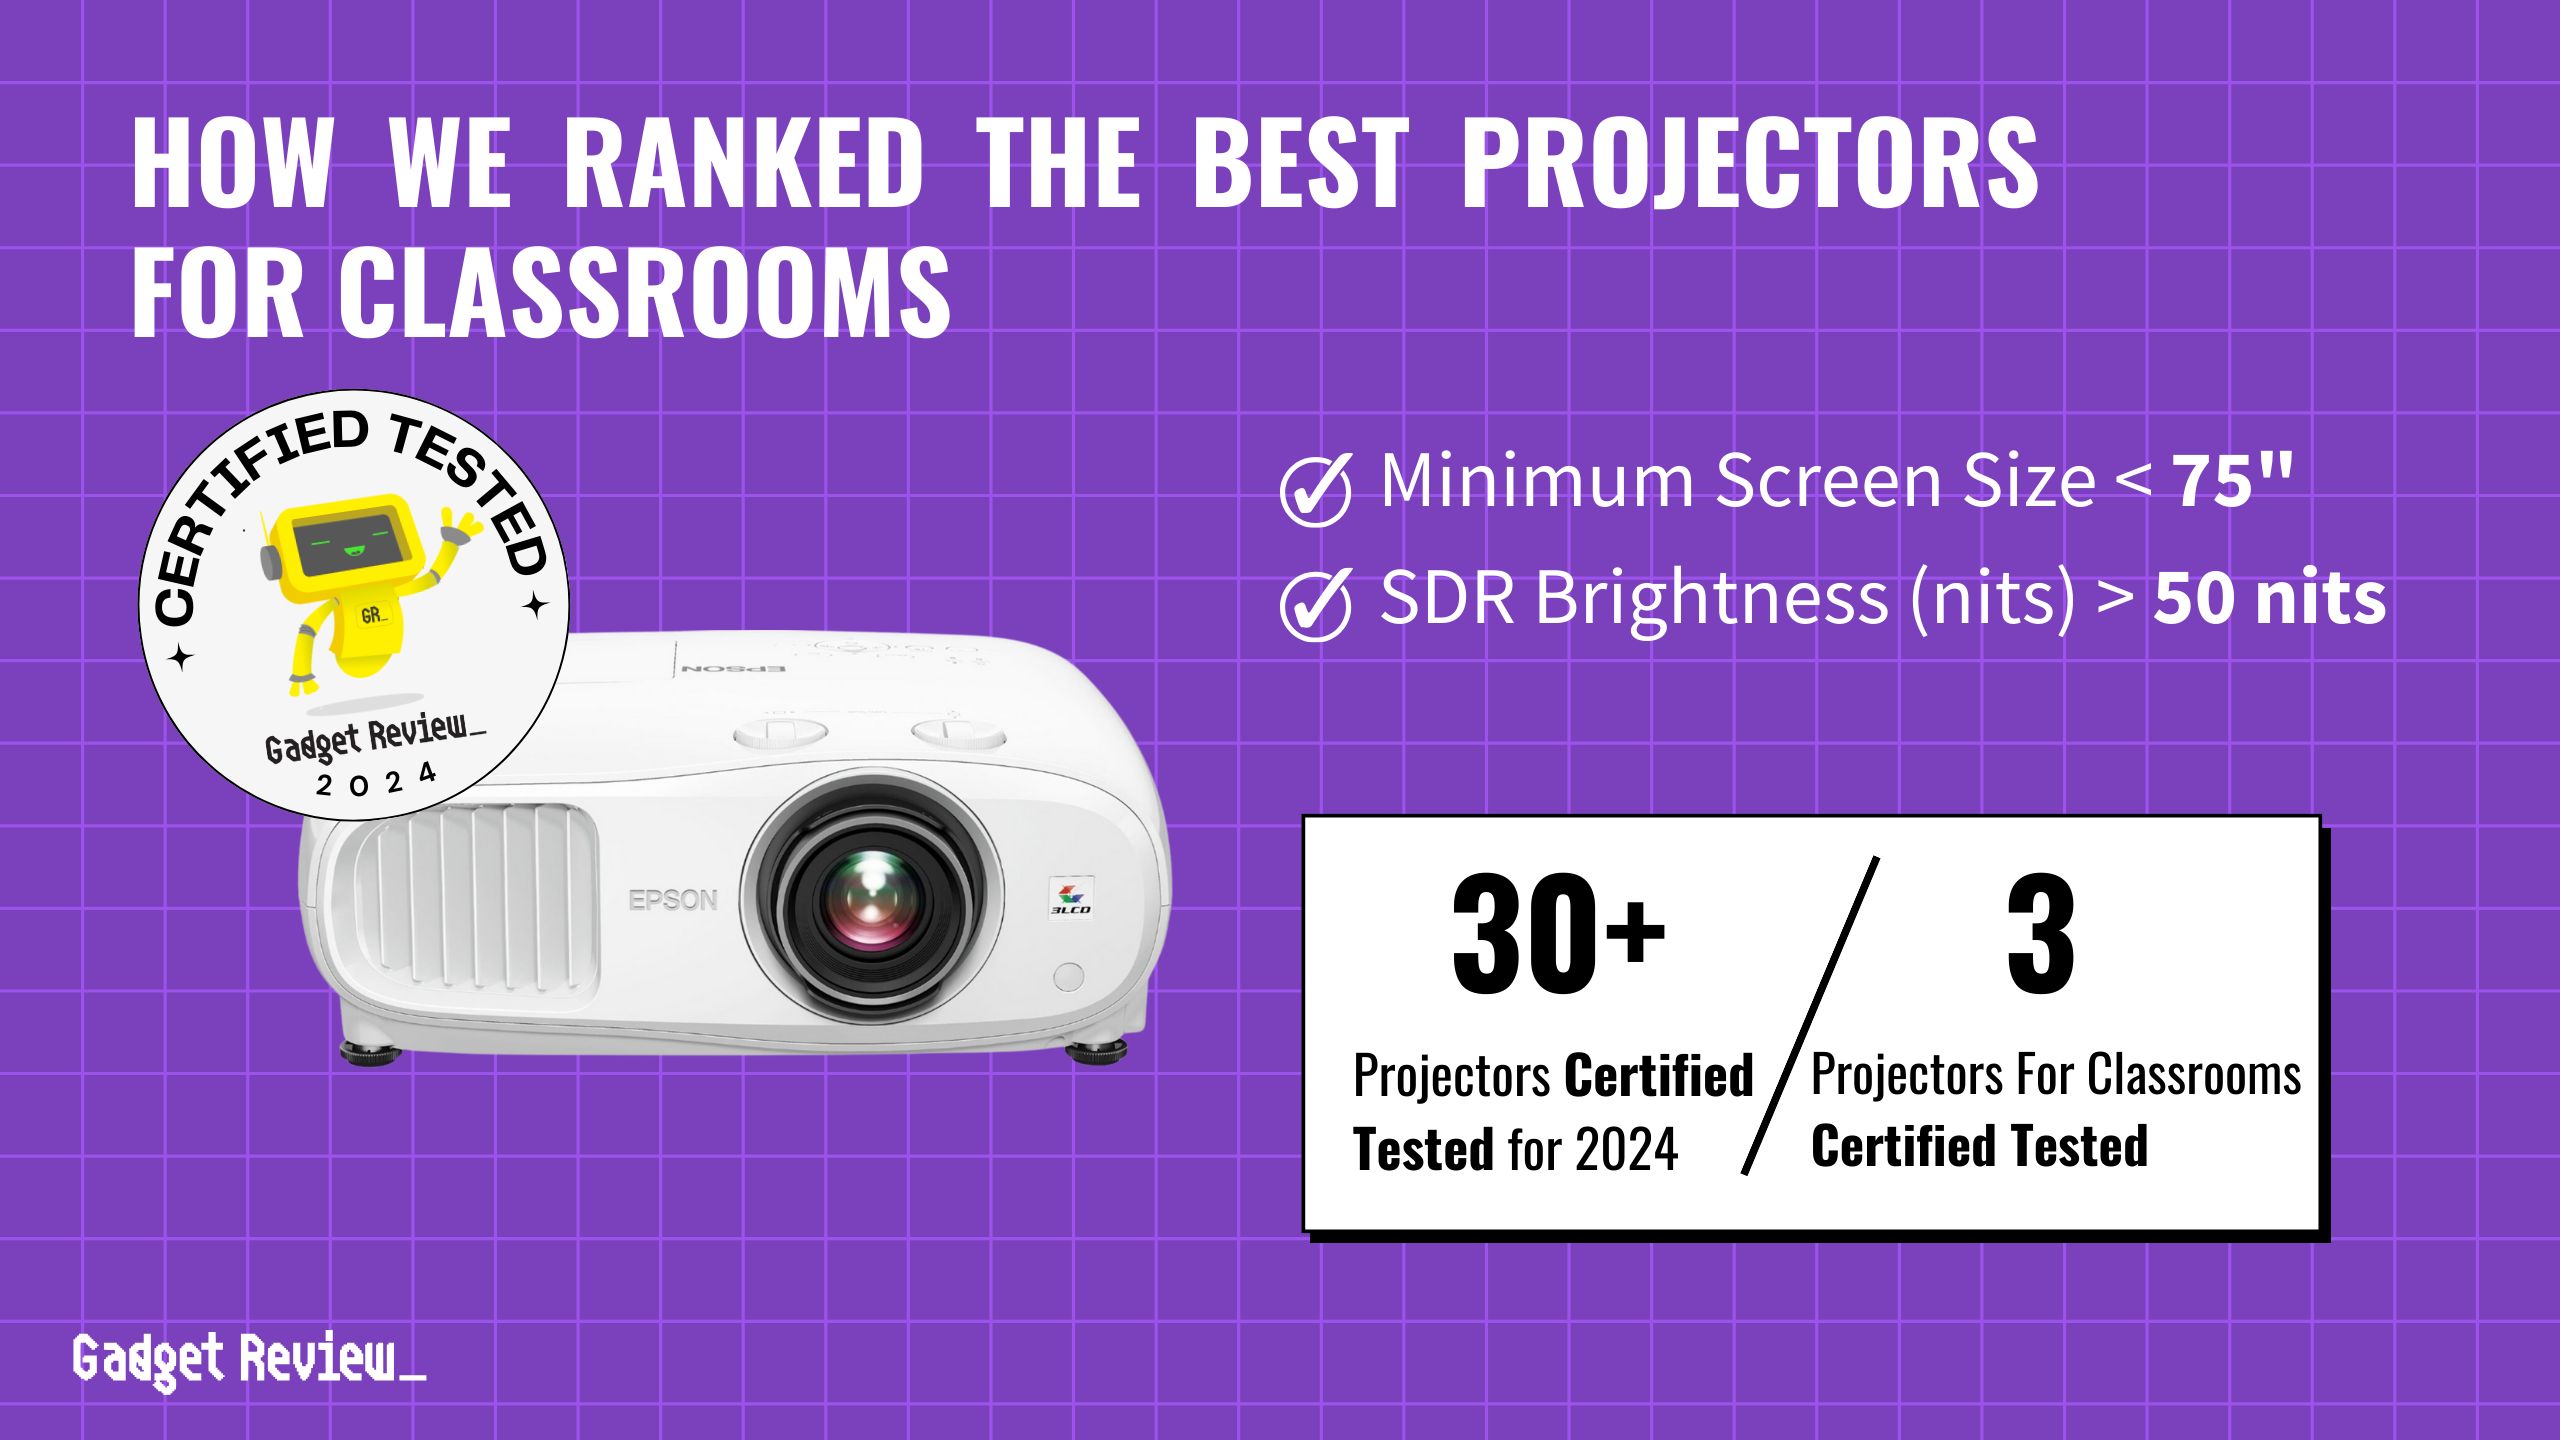 The 3 Top Projectors for Classroom in 2024